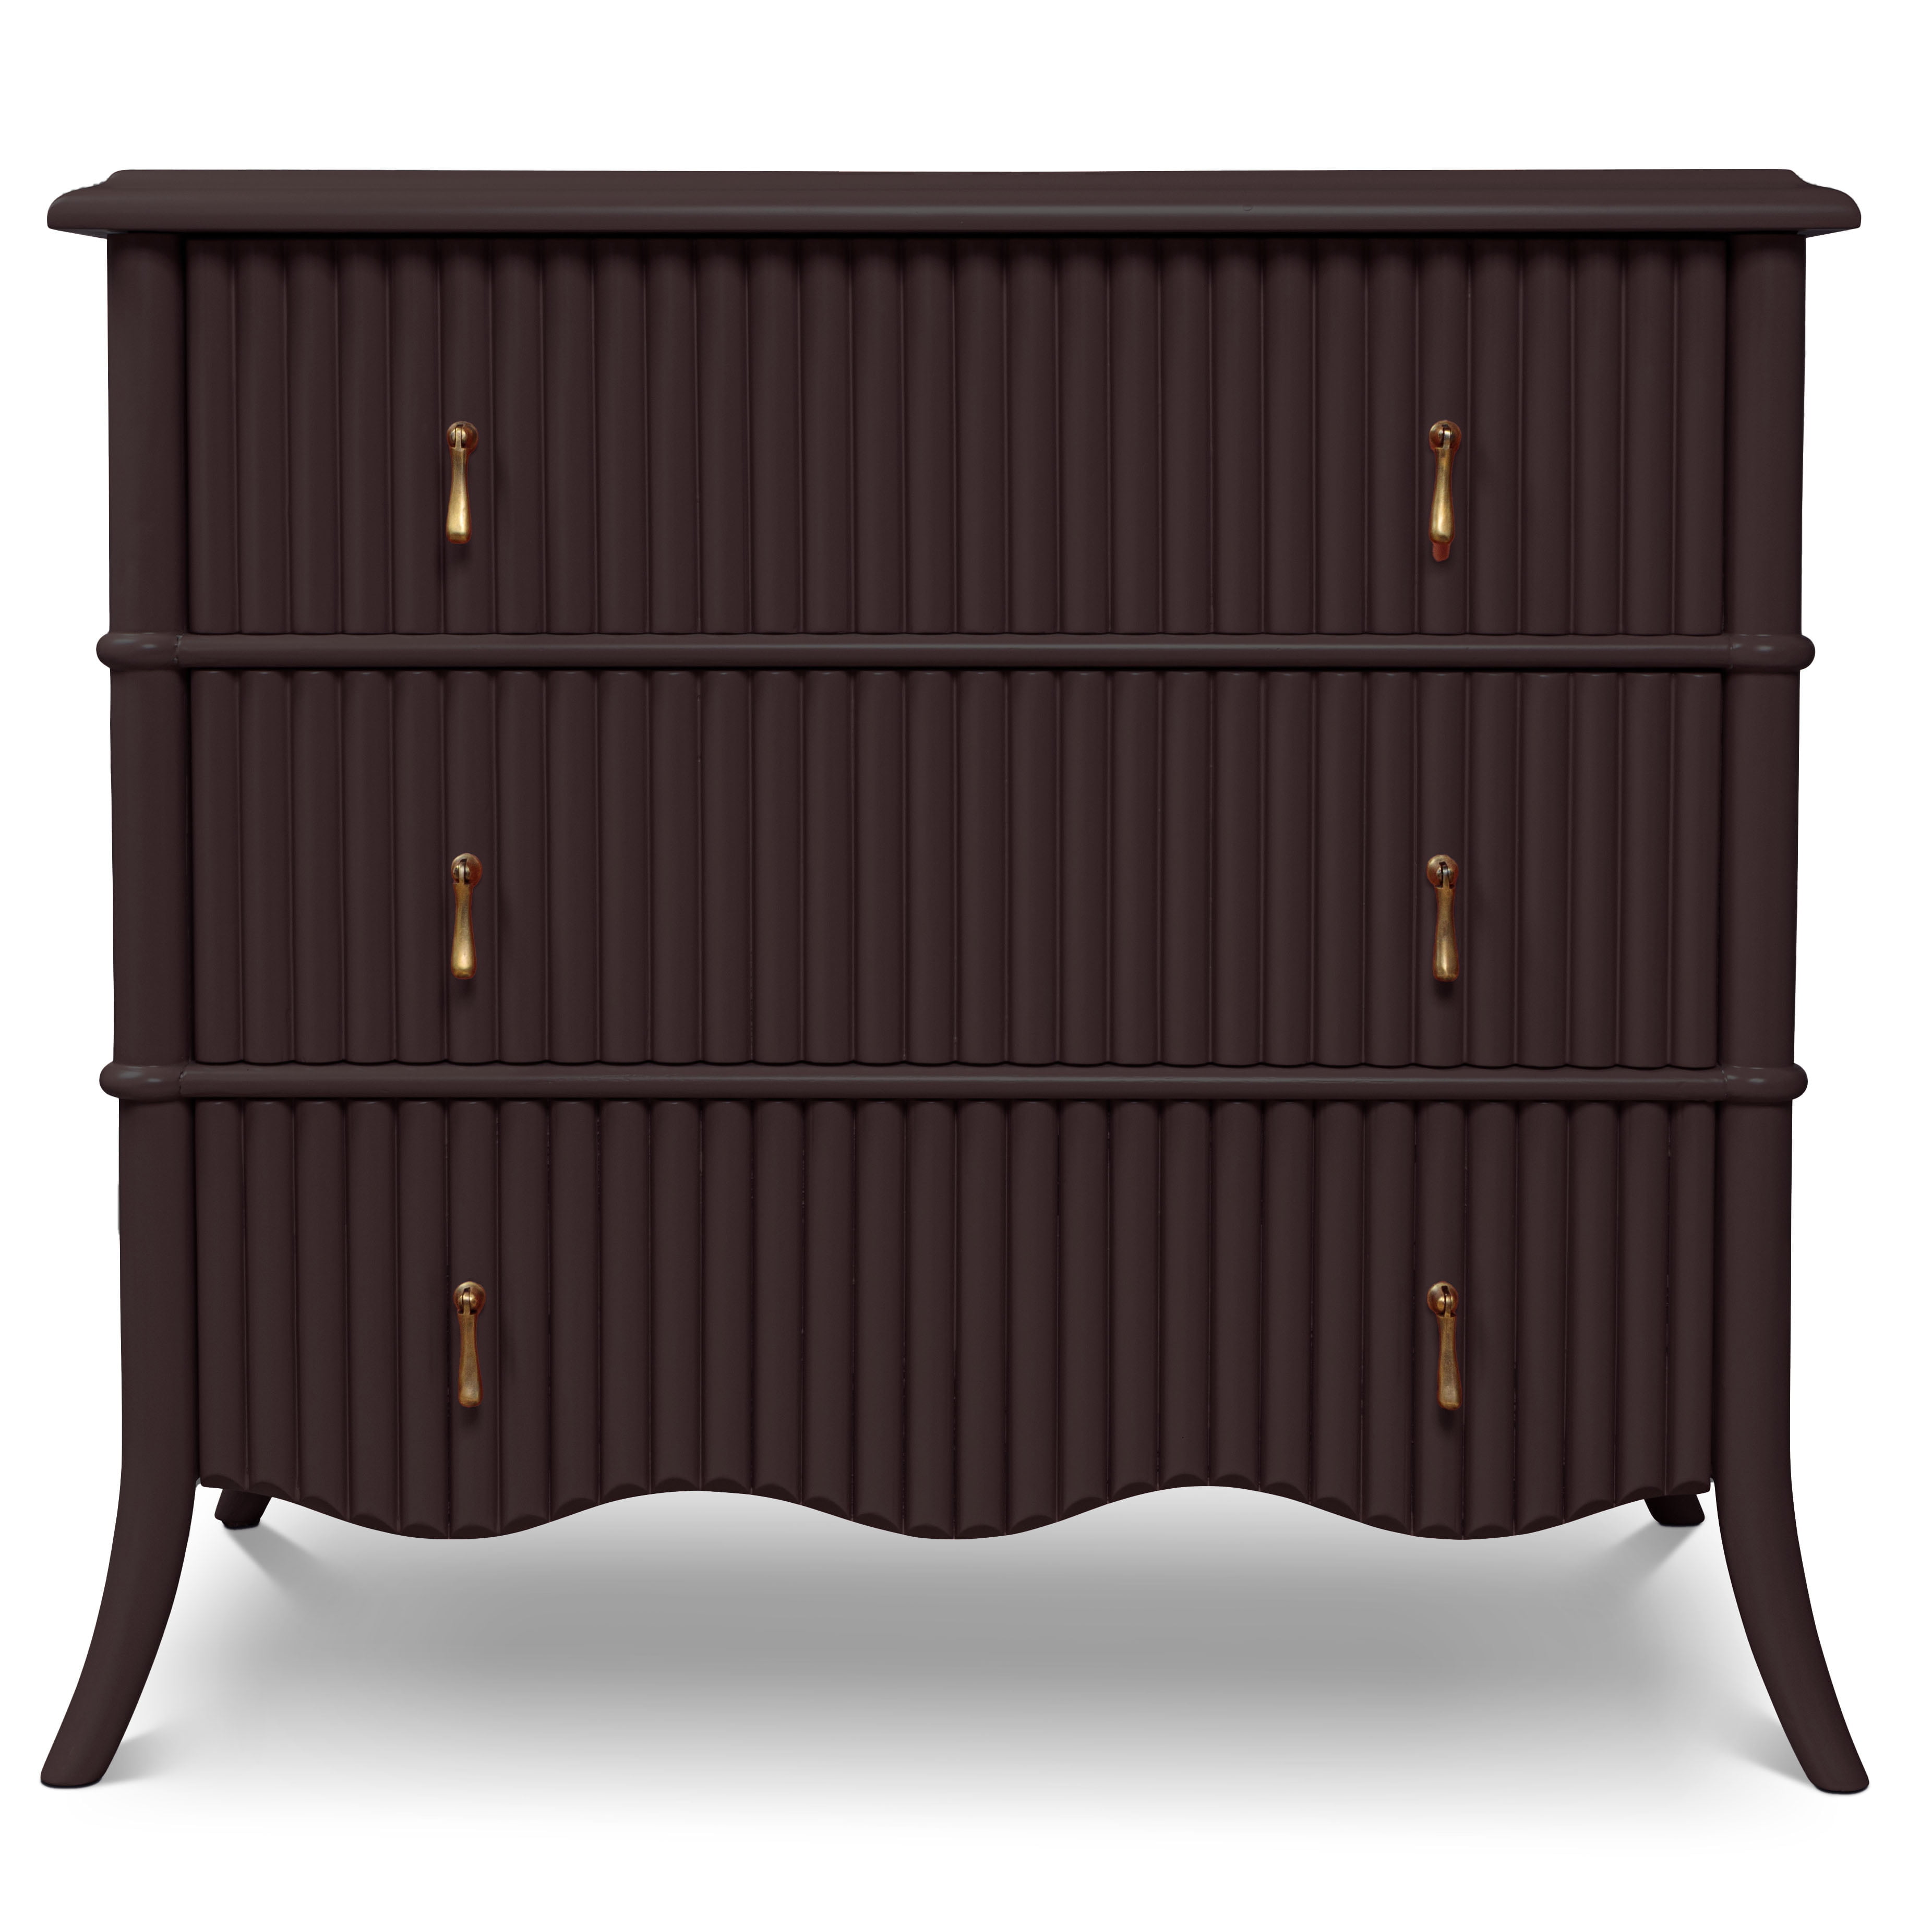 A burgundy-coloured wooden, bamboo-style chest of drawer with pull handles.